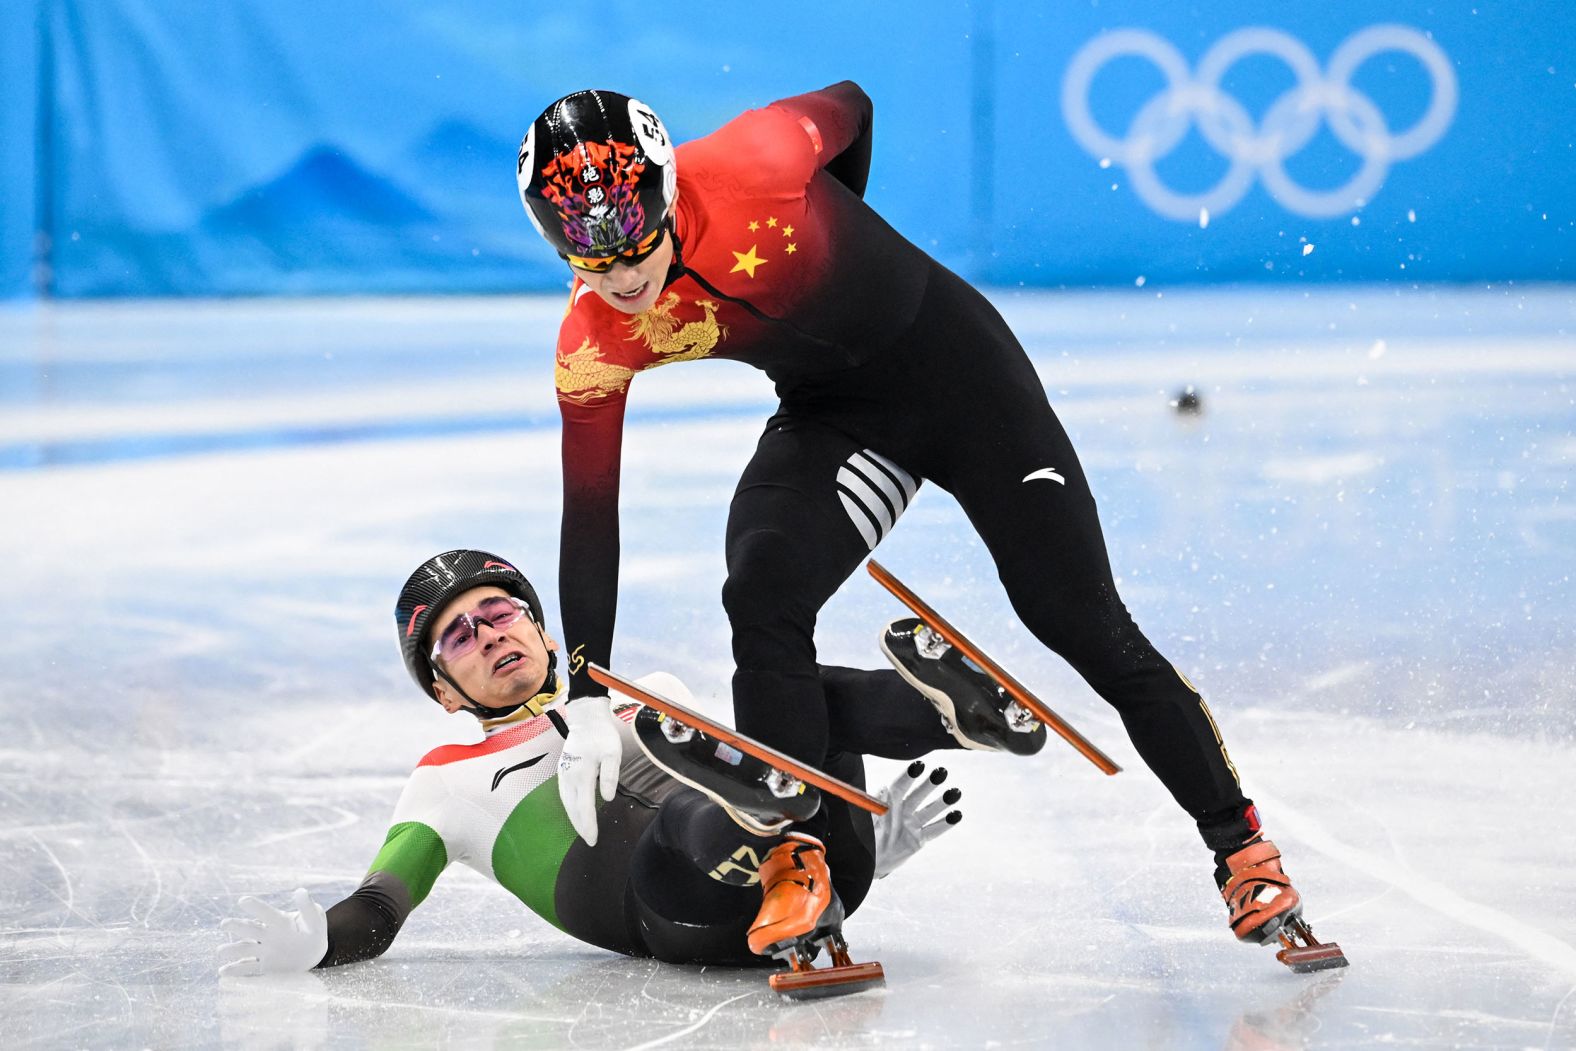 From left, Hungary's Shaolin Sándor Liu gets tangled up with China's Ren Ziwei after crossing the finish line in the 1,000-meter short track final on February 7. Liu crossed the finish line first, but <a href="index.php?page=&url=https%3A%2F%2Fwww.cnn.com%2Fworld%2Flive-news%2Fbeijing-winter-olympics-02-07-22-spt%2Fh_45a9864b48e80e22a0b20b7378fcf05b" target="_blank">Ren was awarded the gold medal</a> after Liu was given a yellow card and two penalties for illegally changing lanes and causing contact with Ren.